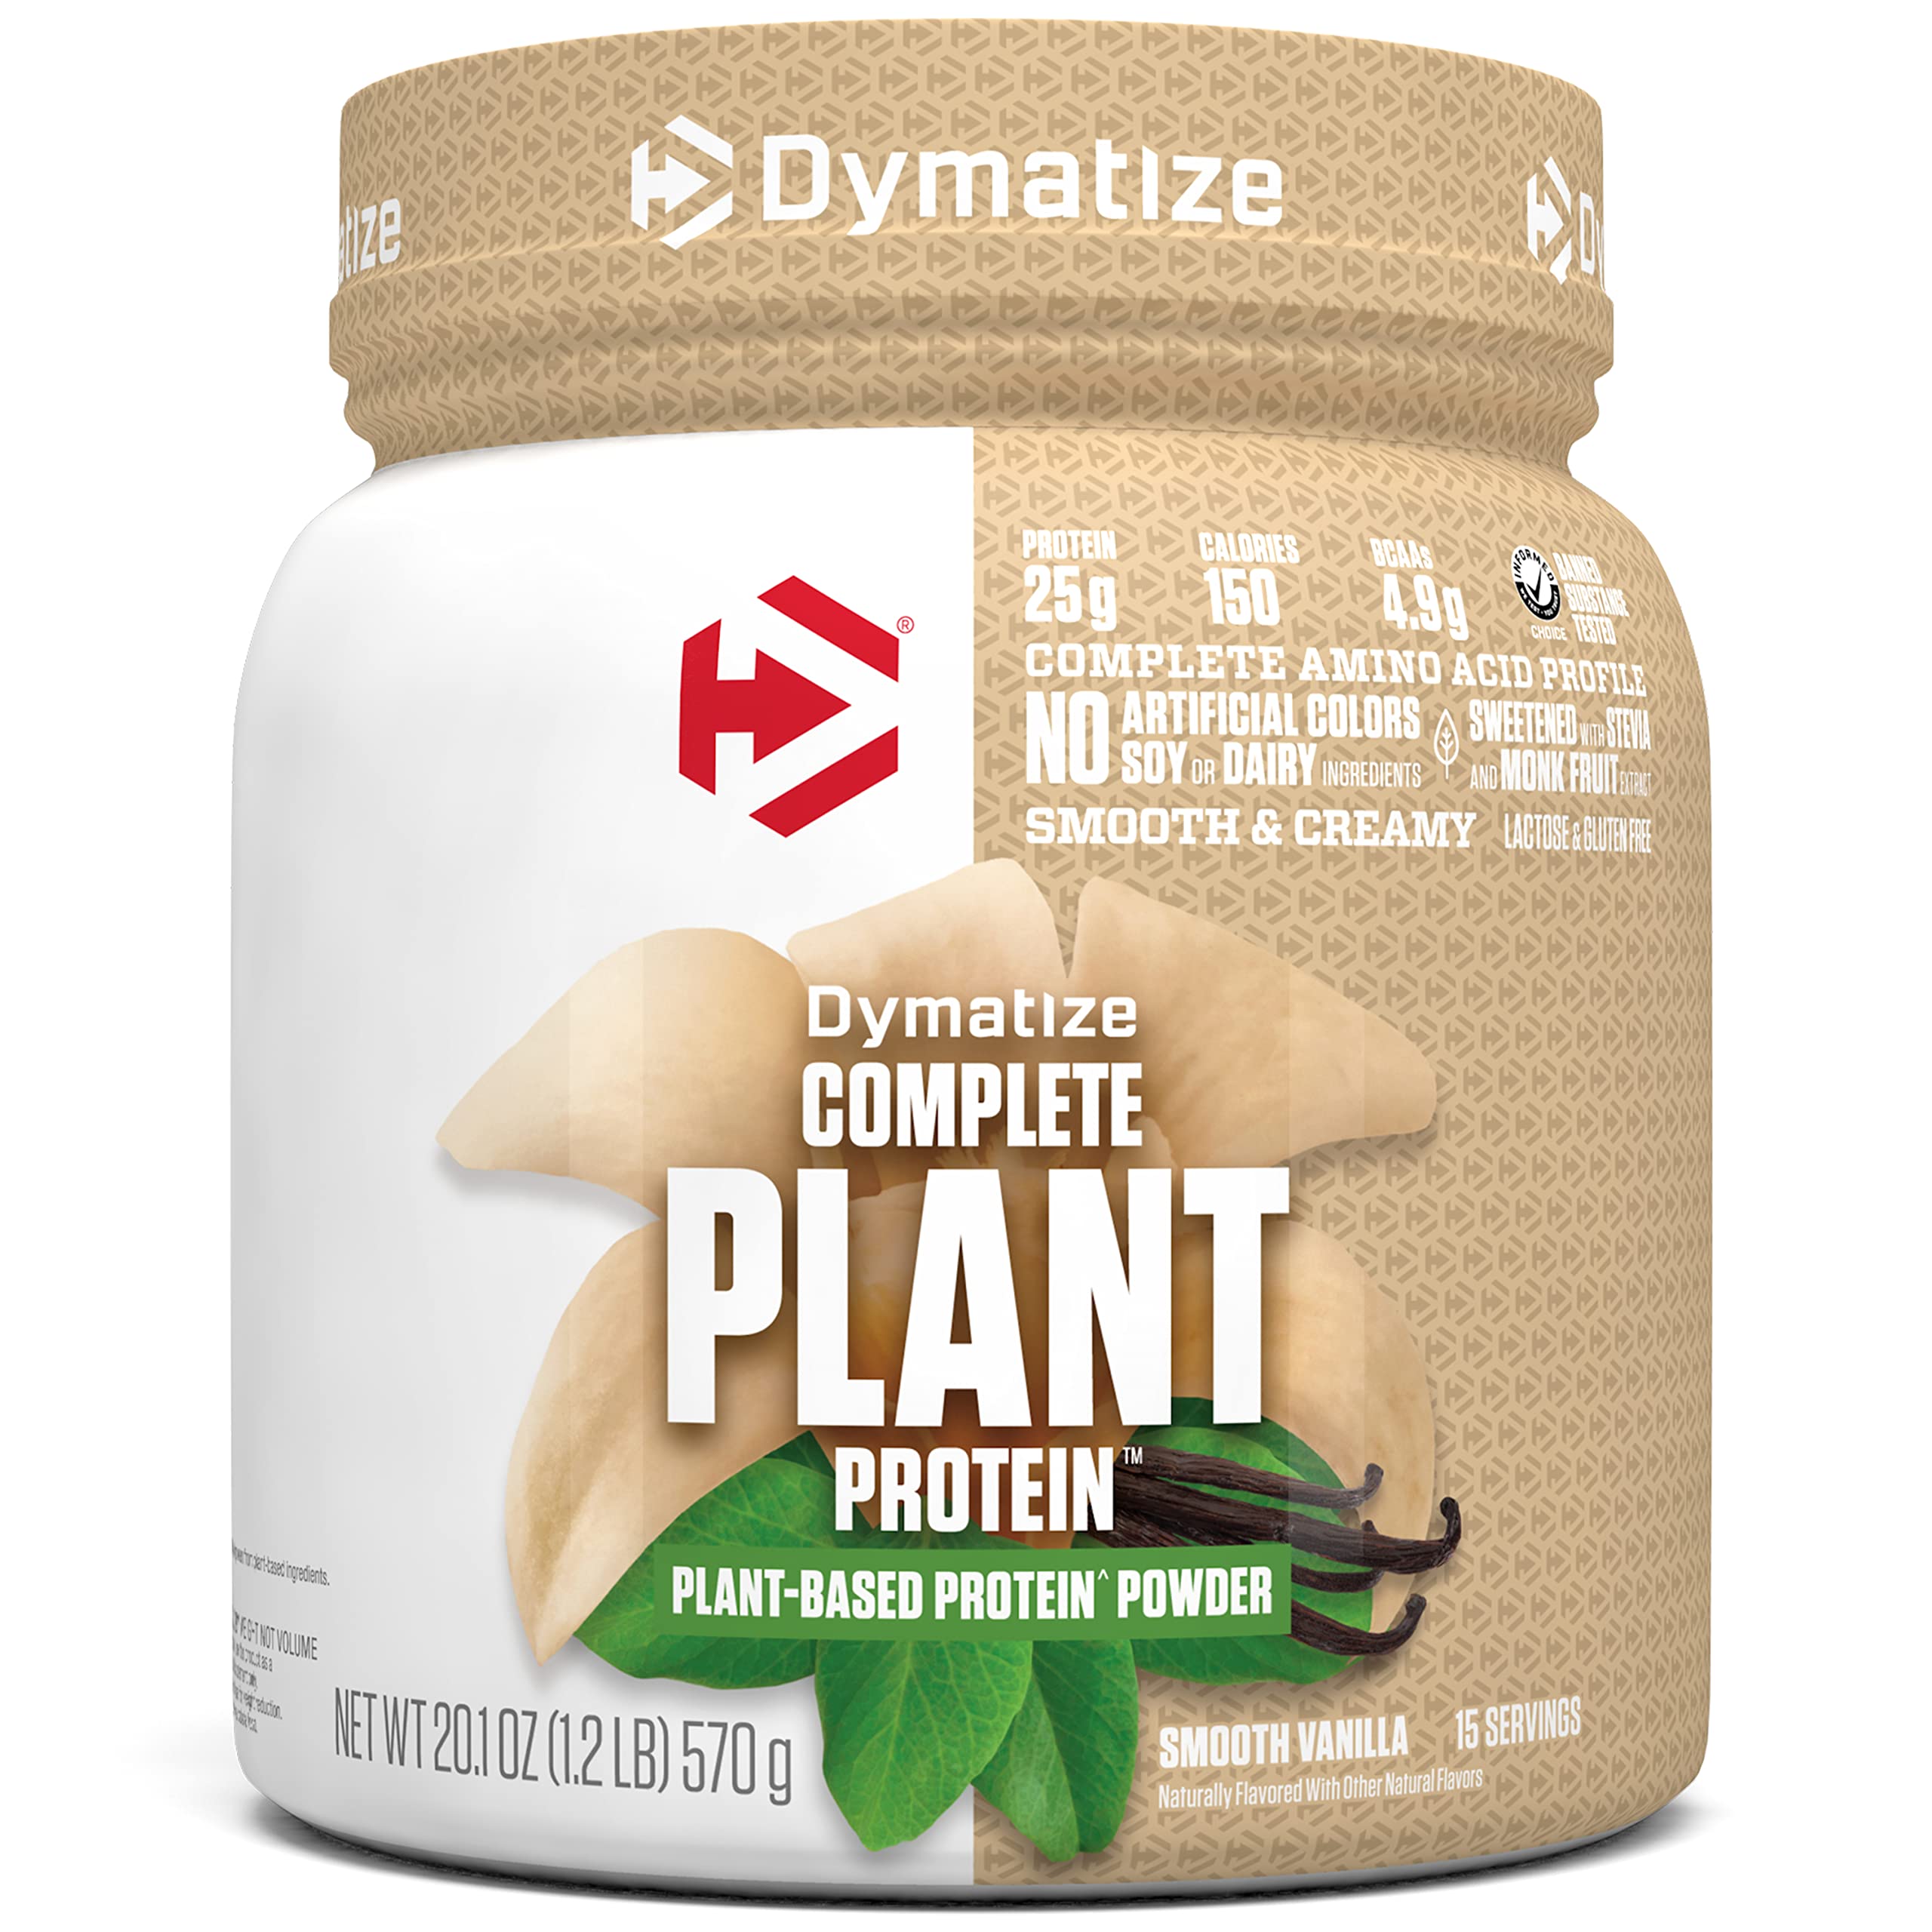 1.2-Lb Dymatize Vegan Plant Protein Smooth Vanilla $8.42 or 1.3-Lb Creamy Chocolate $8.46 w/ S&S + Free Shipping w/ Prime or on orders over $25